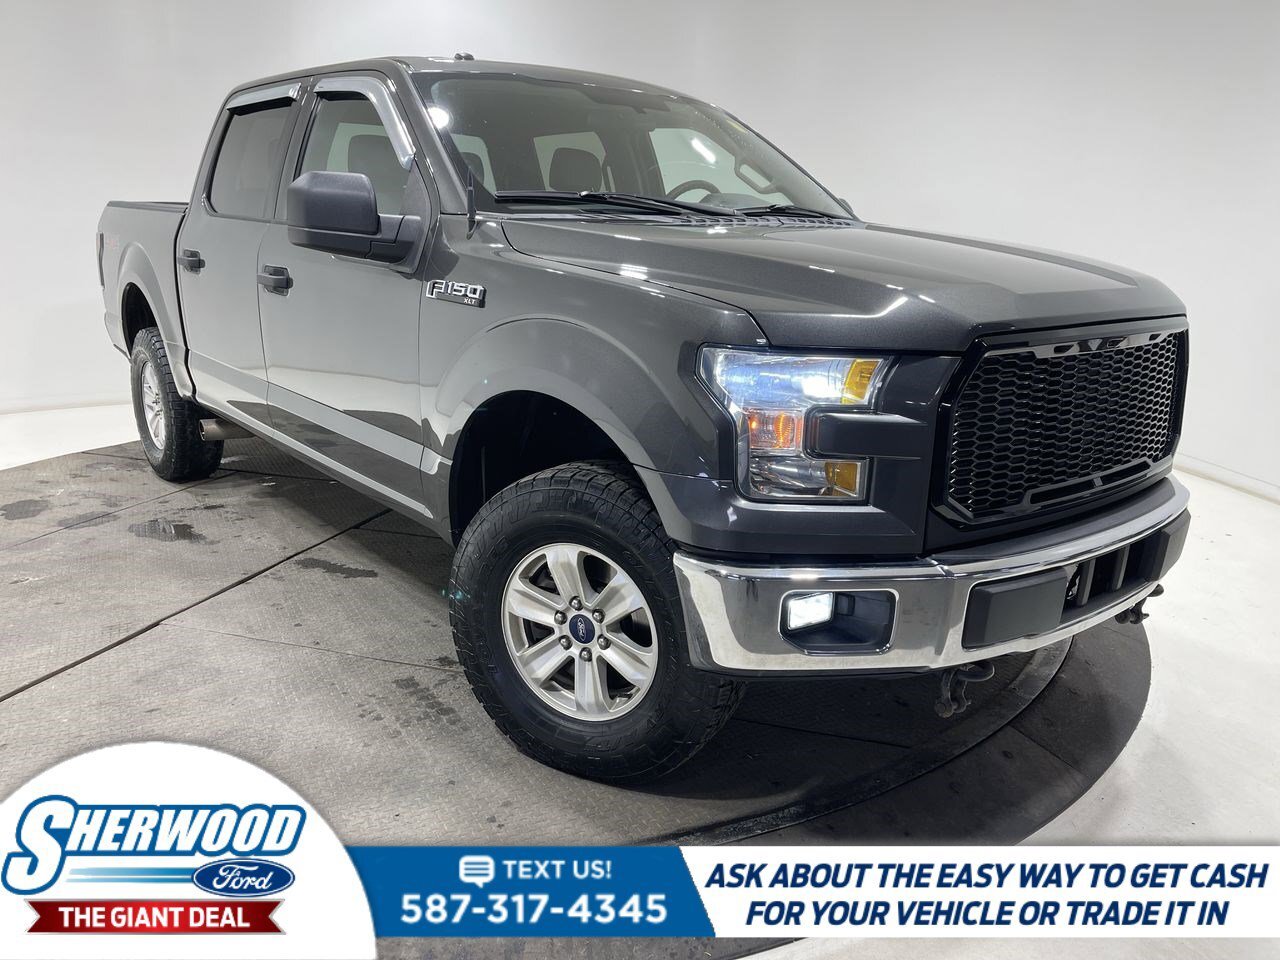 2015 Ford F-150 XLT- $0 Down $167 Weekly